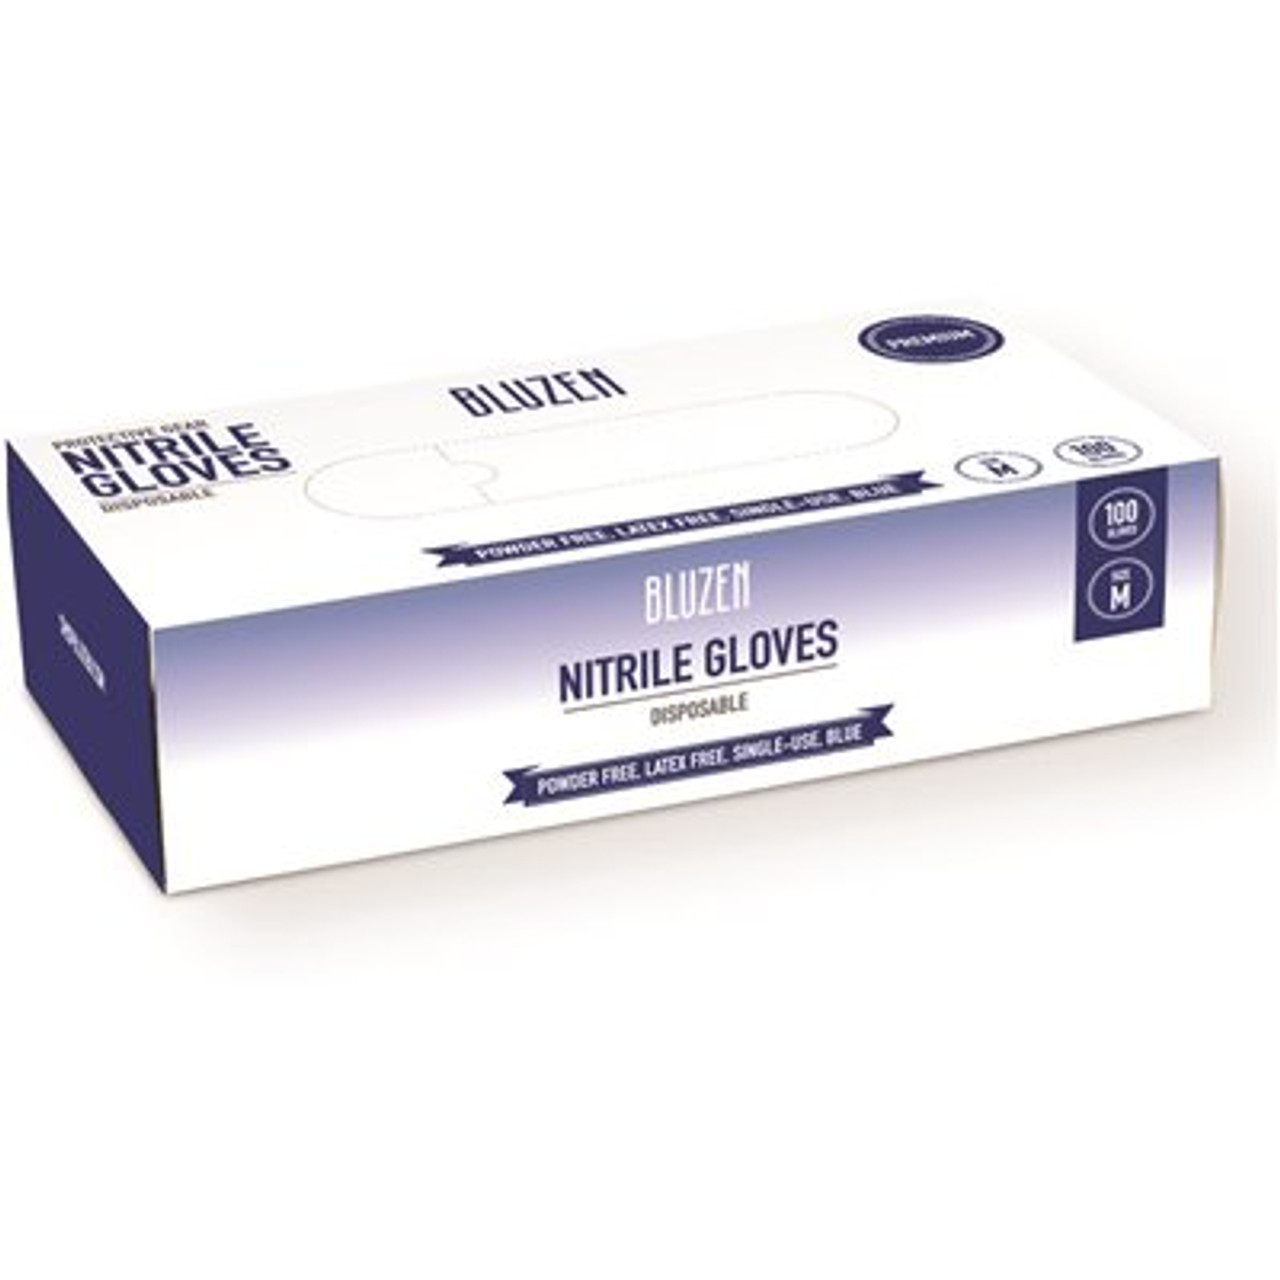 SAFETY WERCS Large Blue Extra-Strength 5mil Nitrile Gloves 1000-Count Case